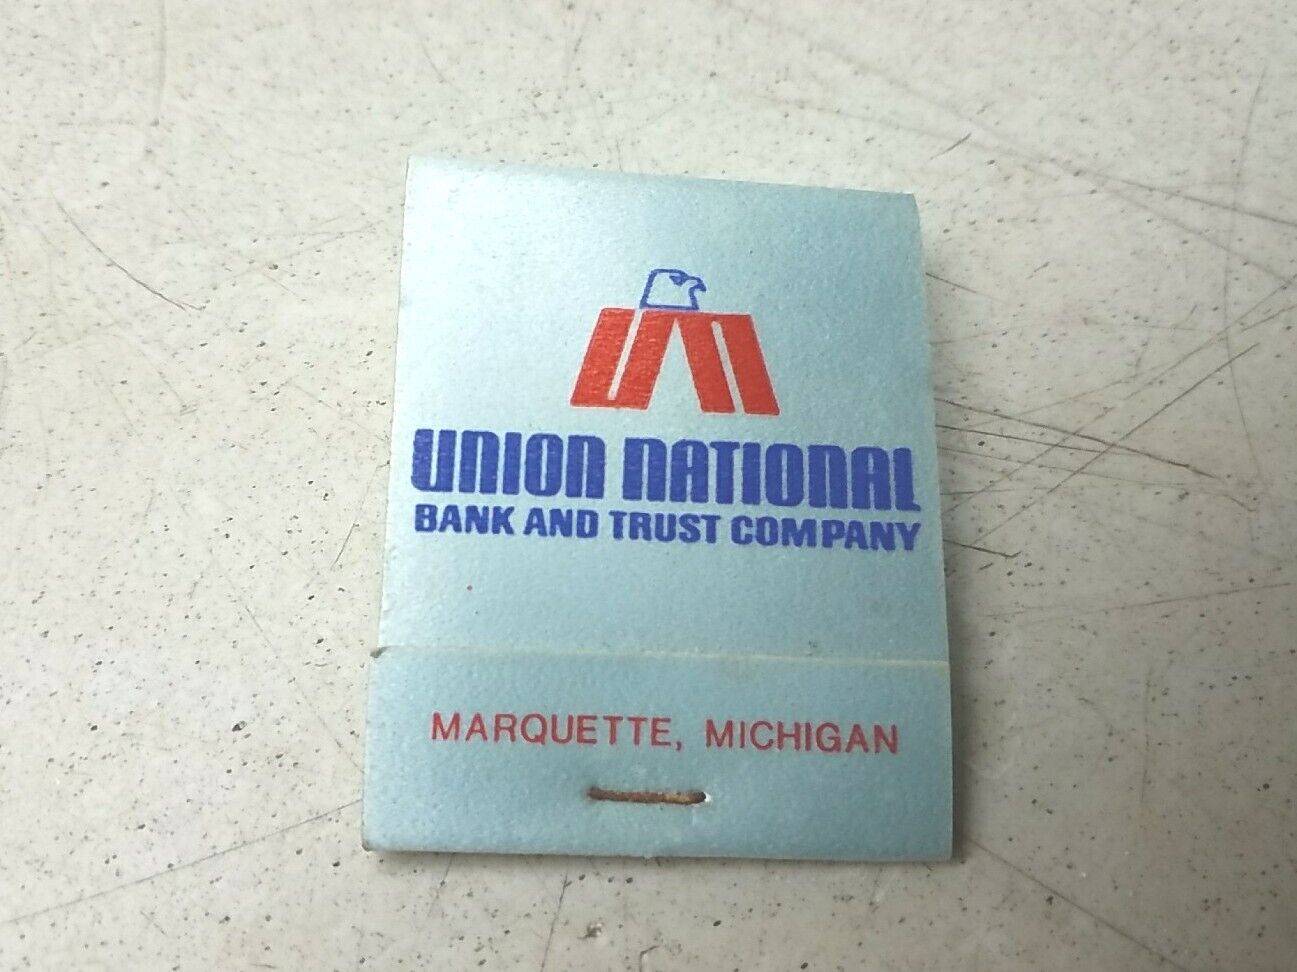 Union National Bank And Trust Marquette Michigan Vintage Advertising Matchbook